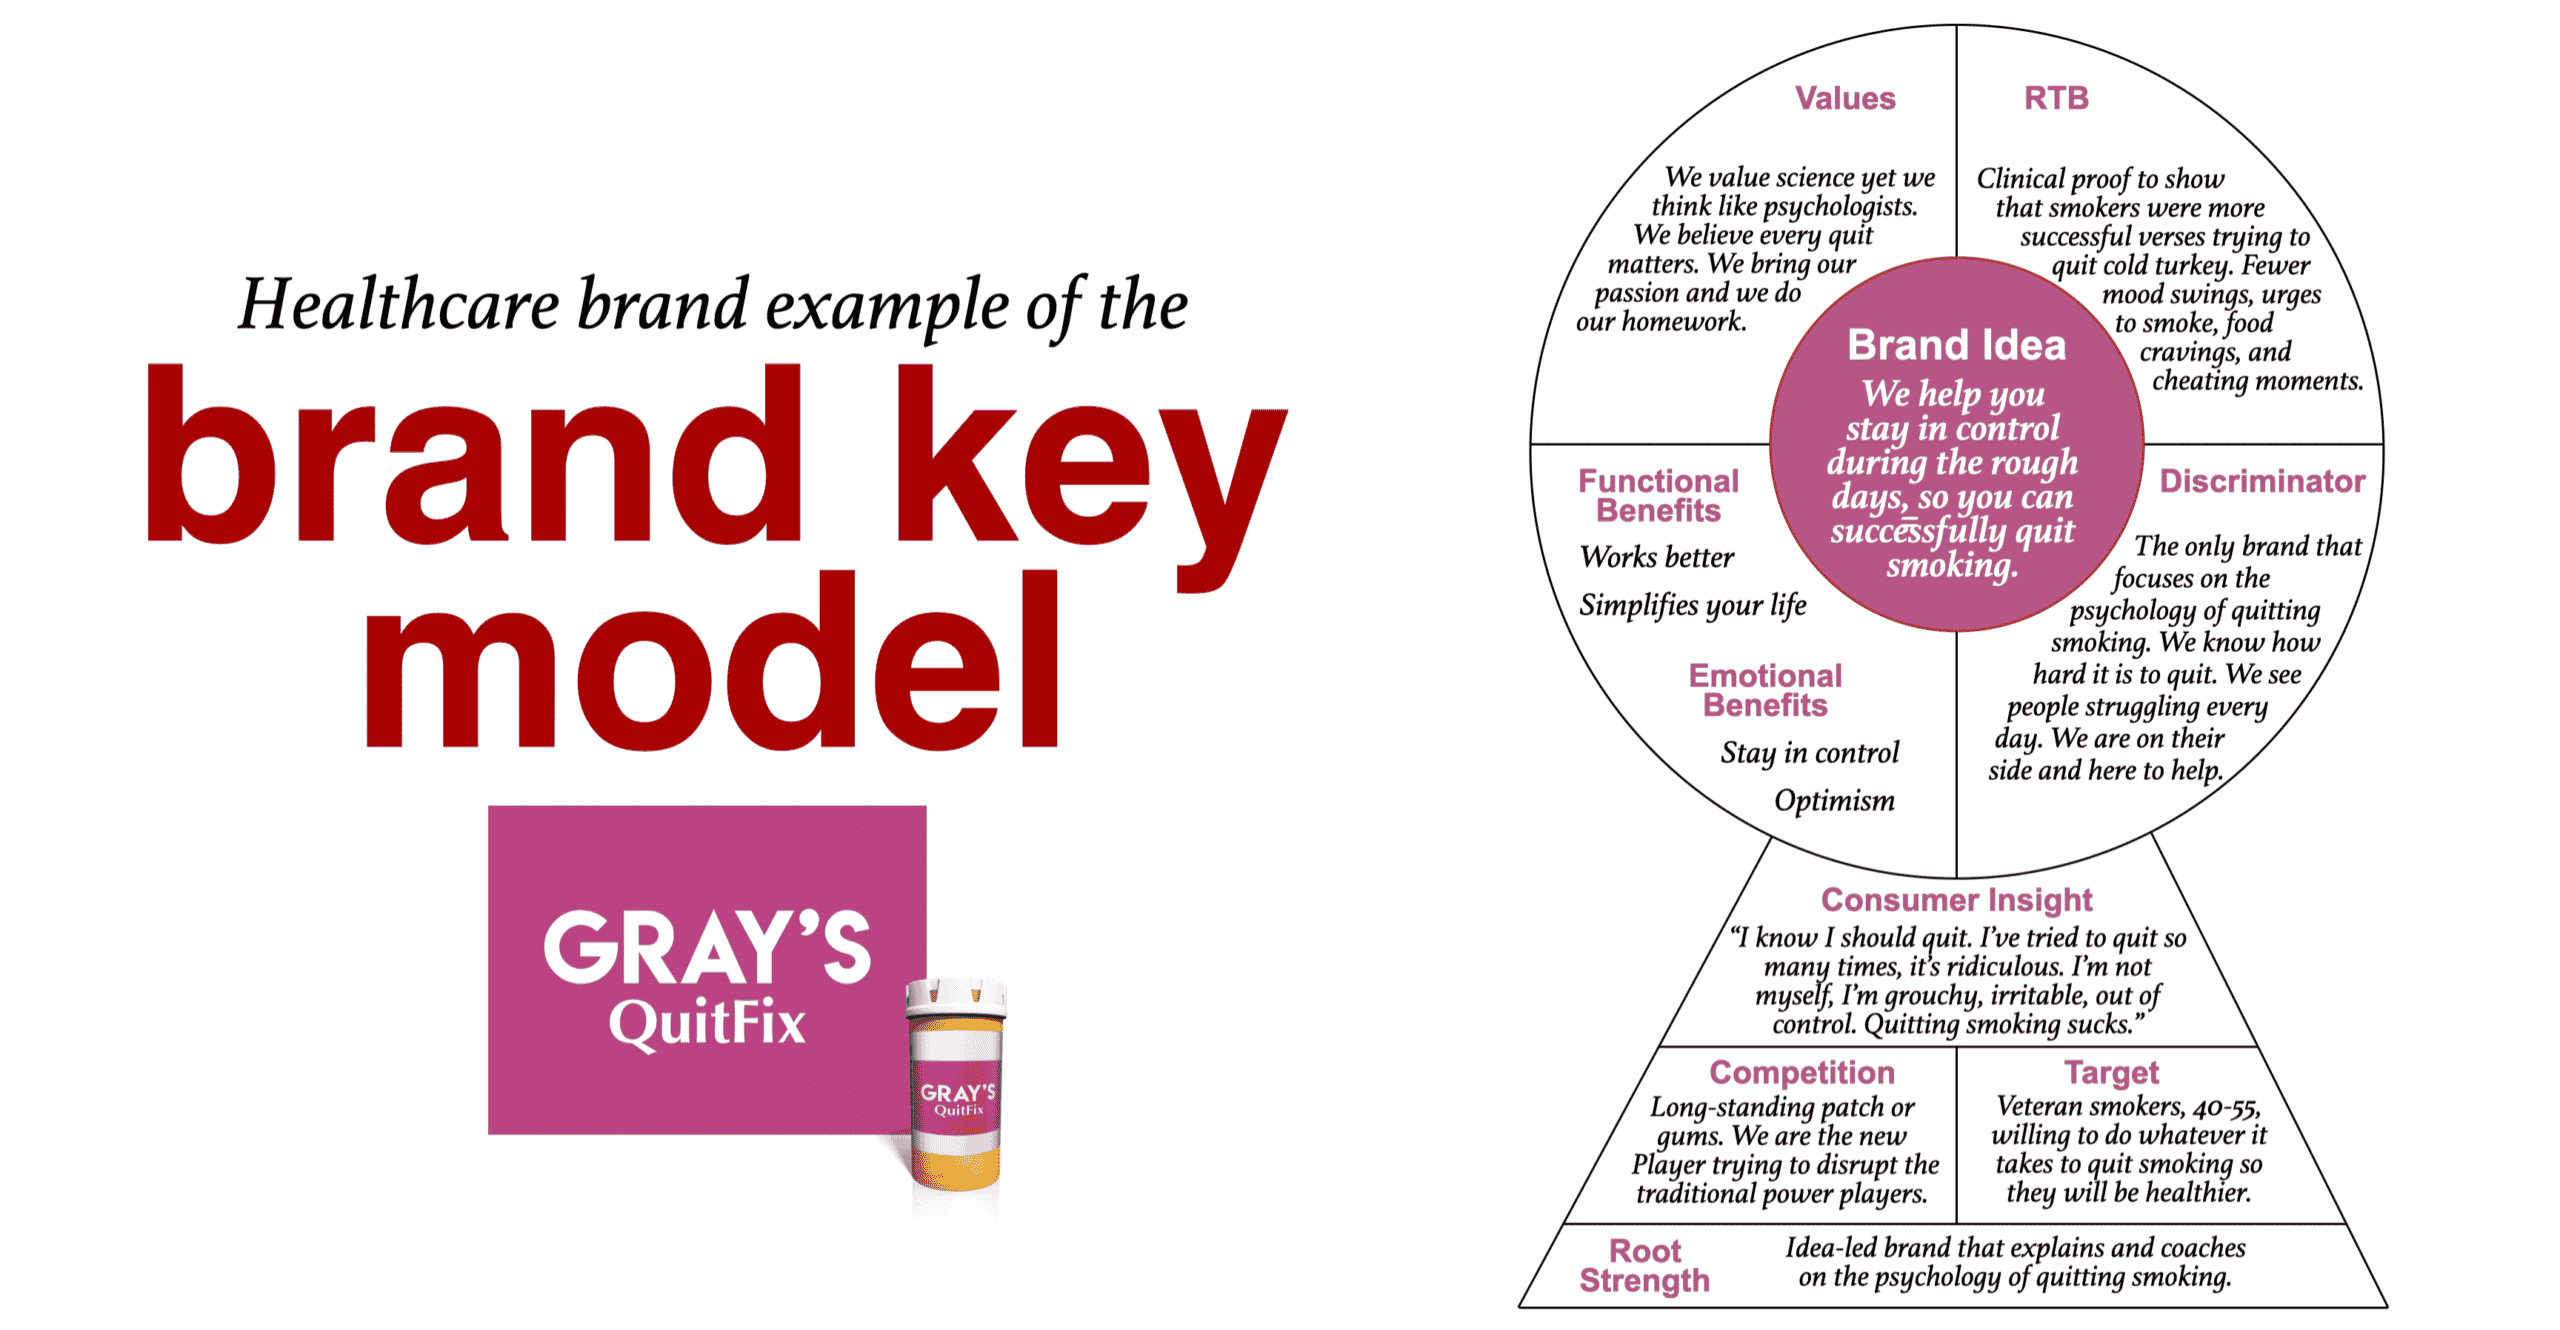 Brand Key Example for a Healthcare or pharma brand